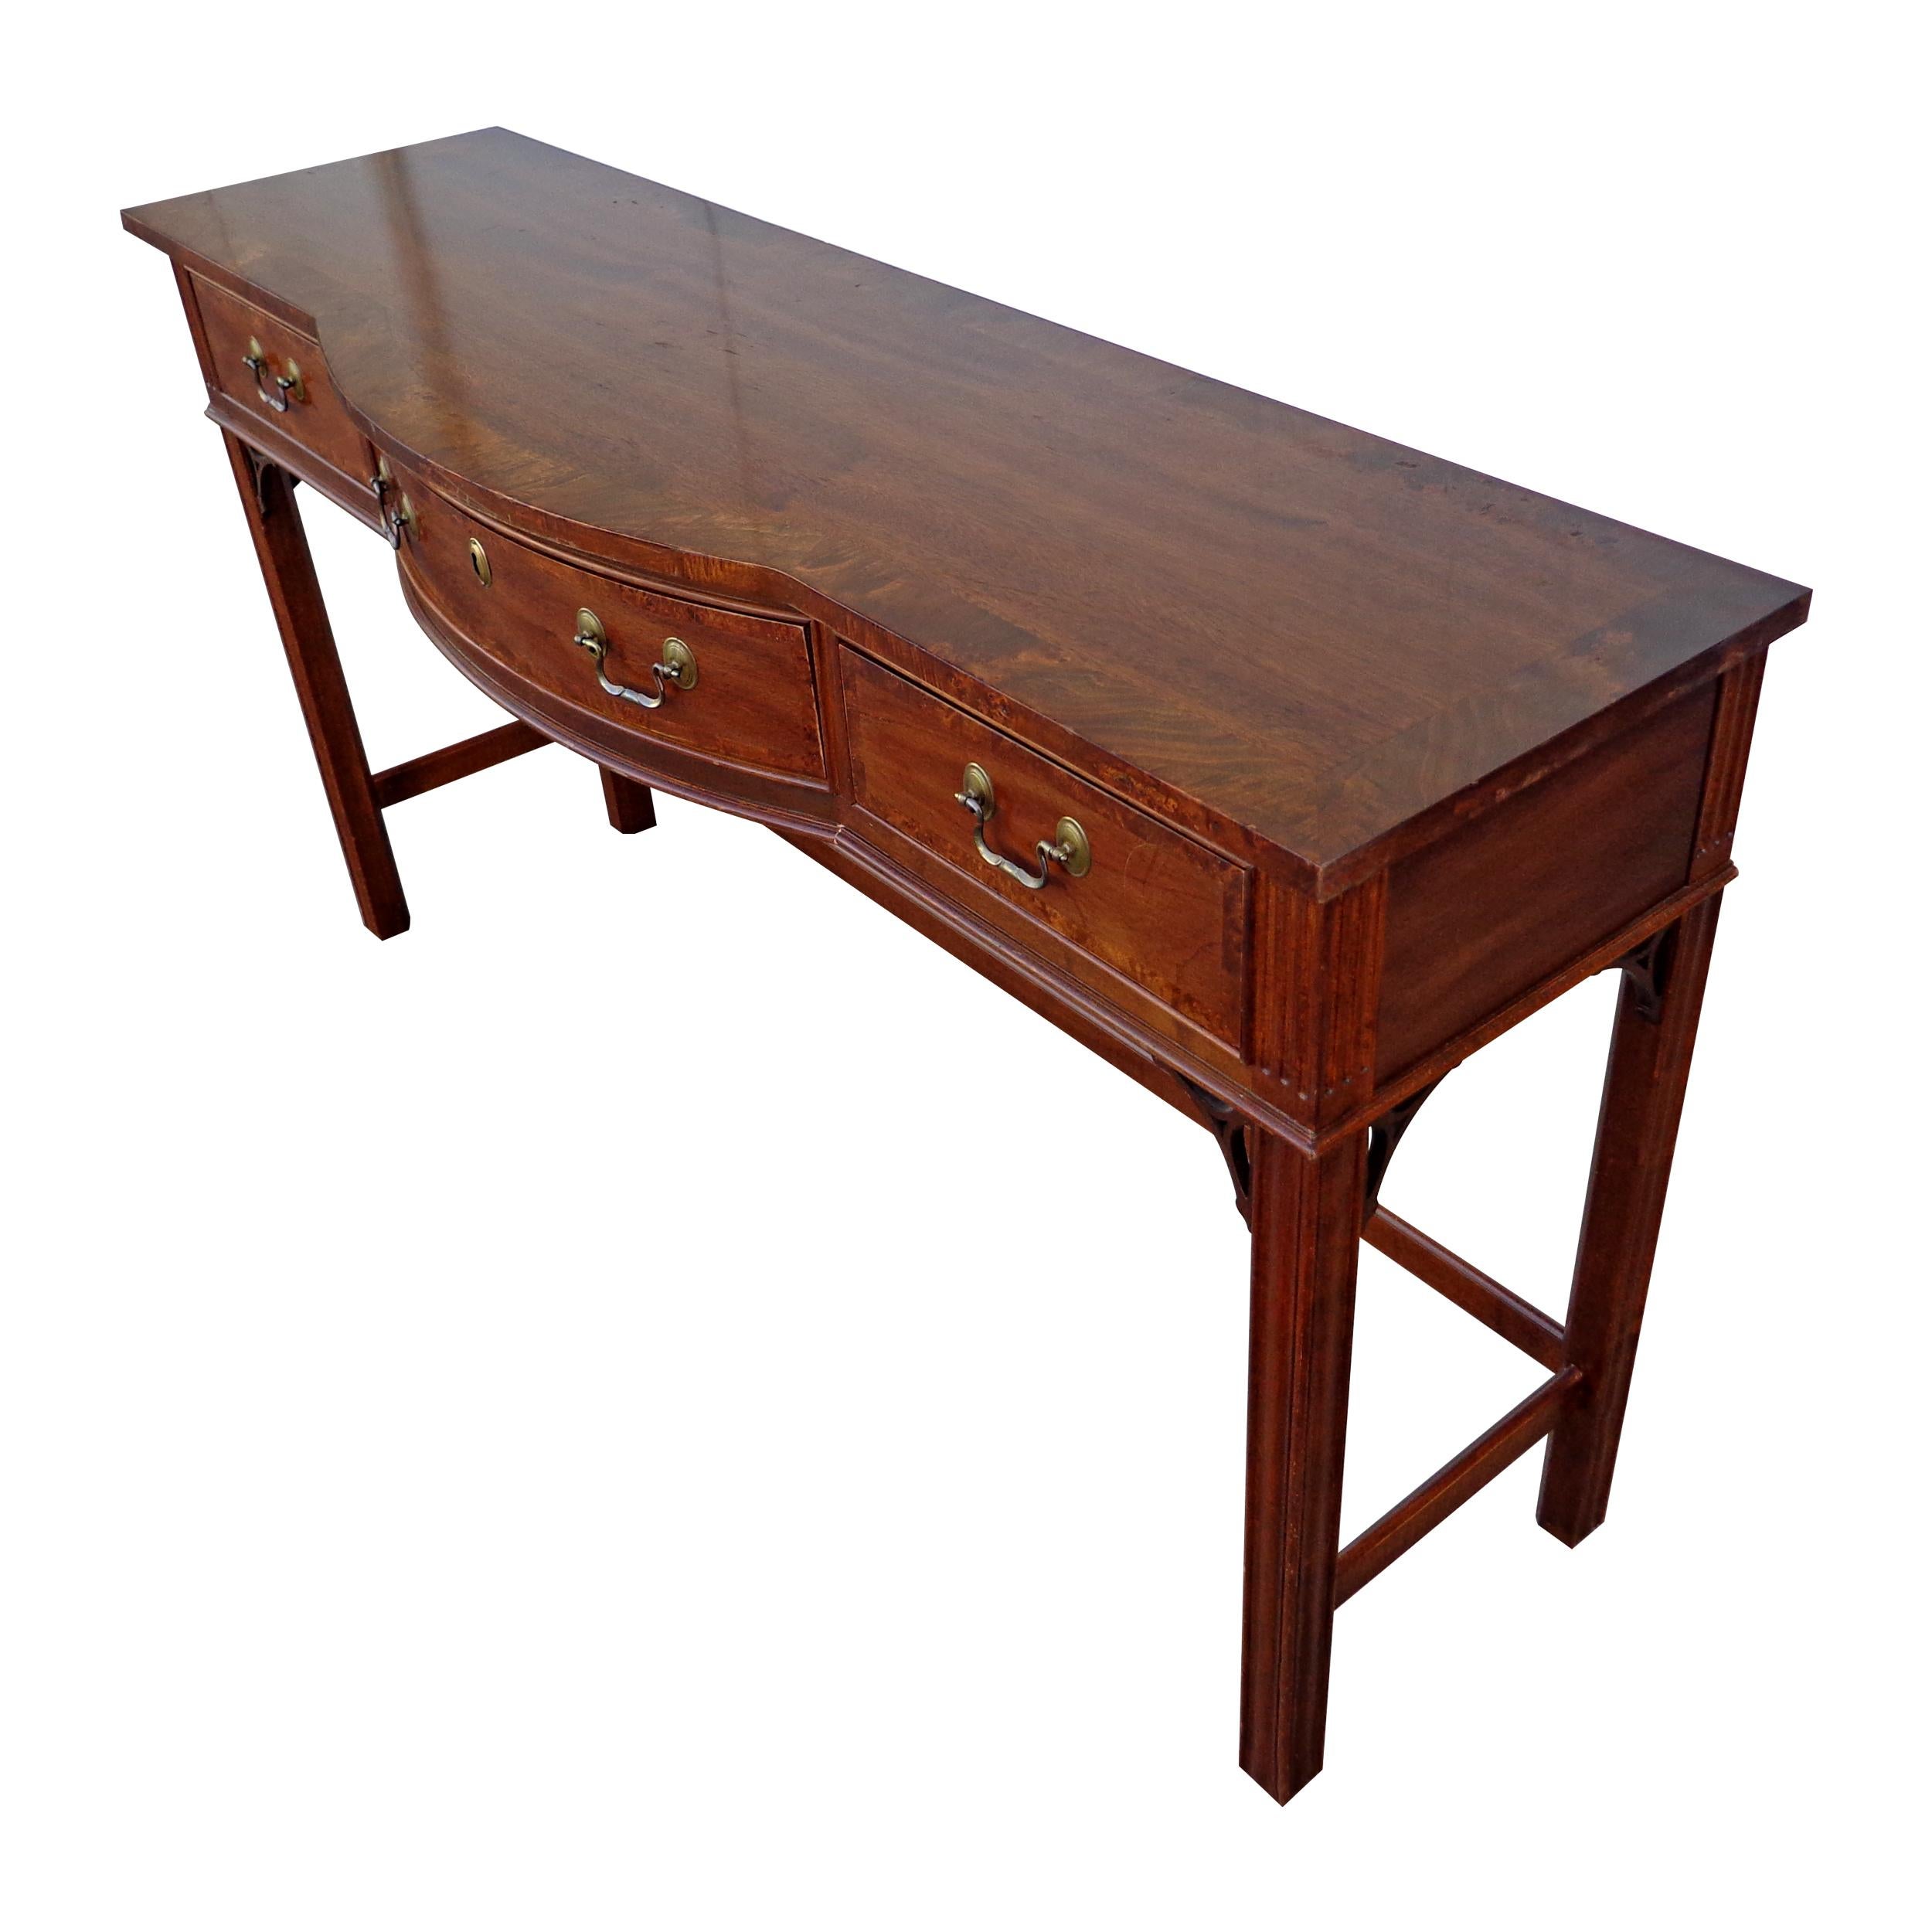 Sherrill console table featuring a birds eye maple inlay border on the top. Chippendale style base with bowed front.
Three drawers with brass pulls. Center drawer with lock. Measure: 56